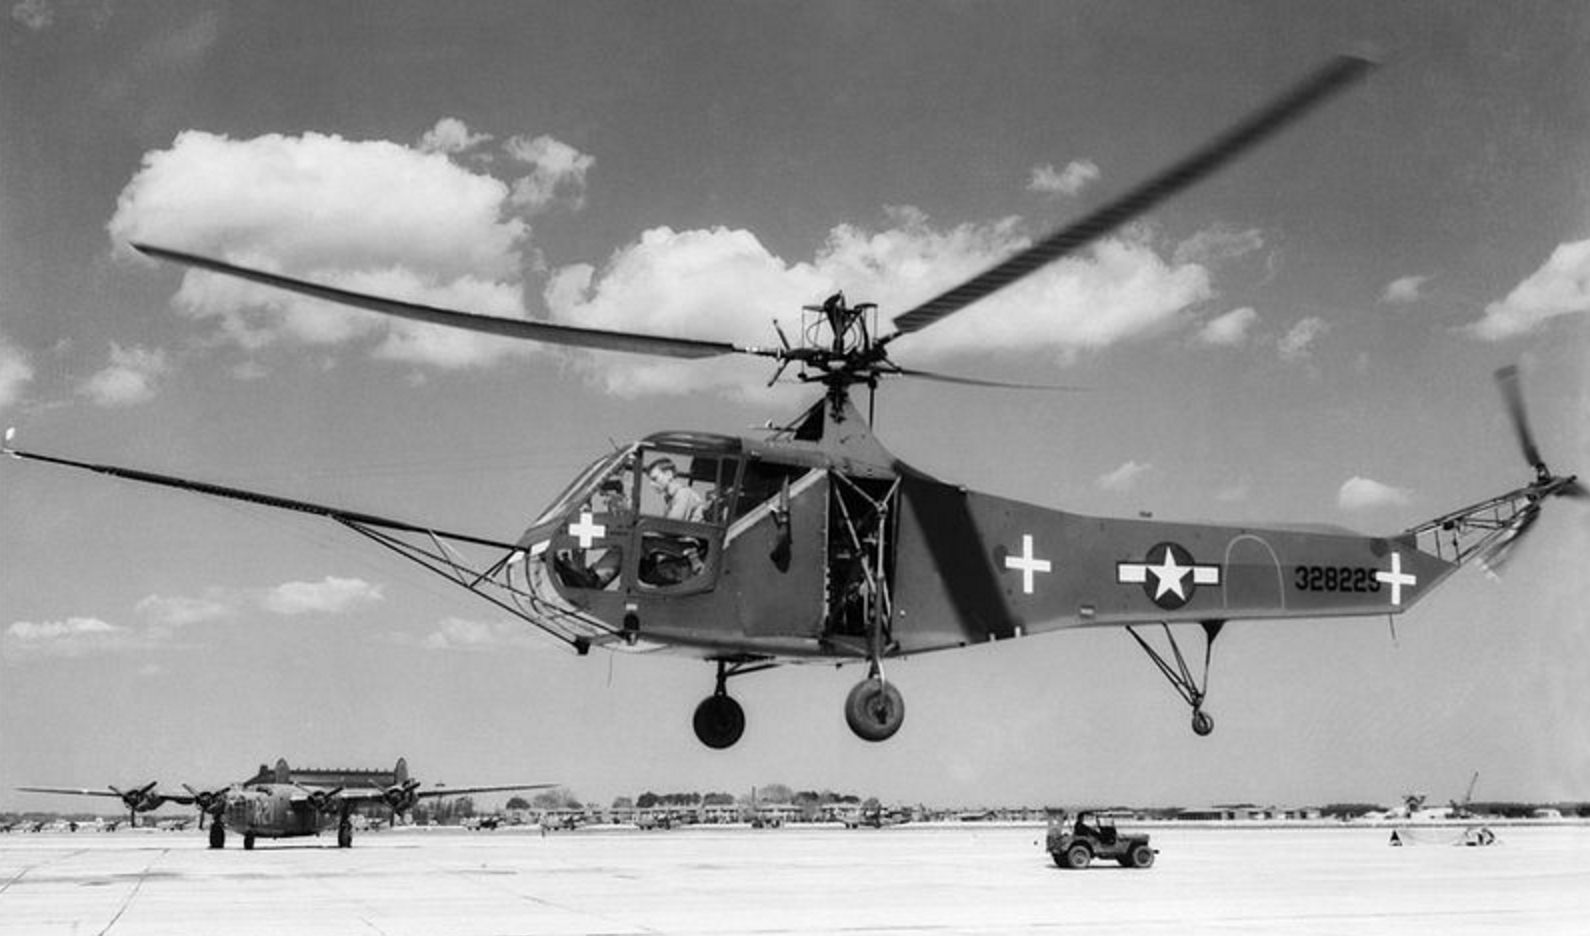 Early Military Helicopter in flight testing